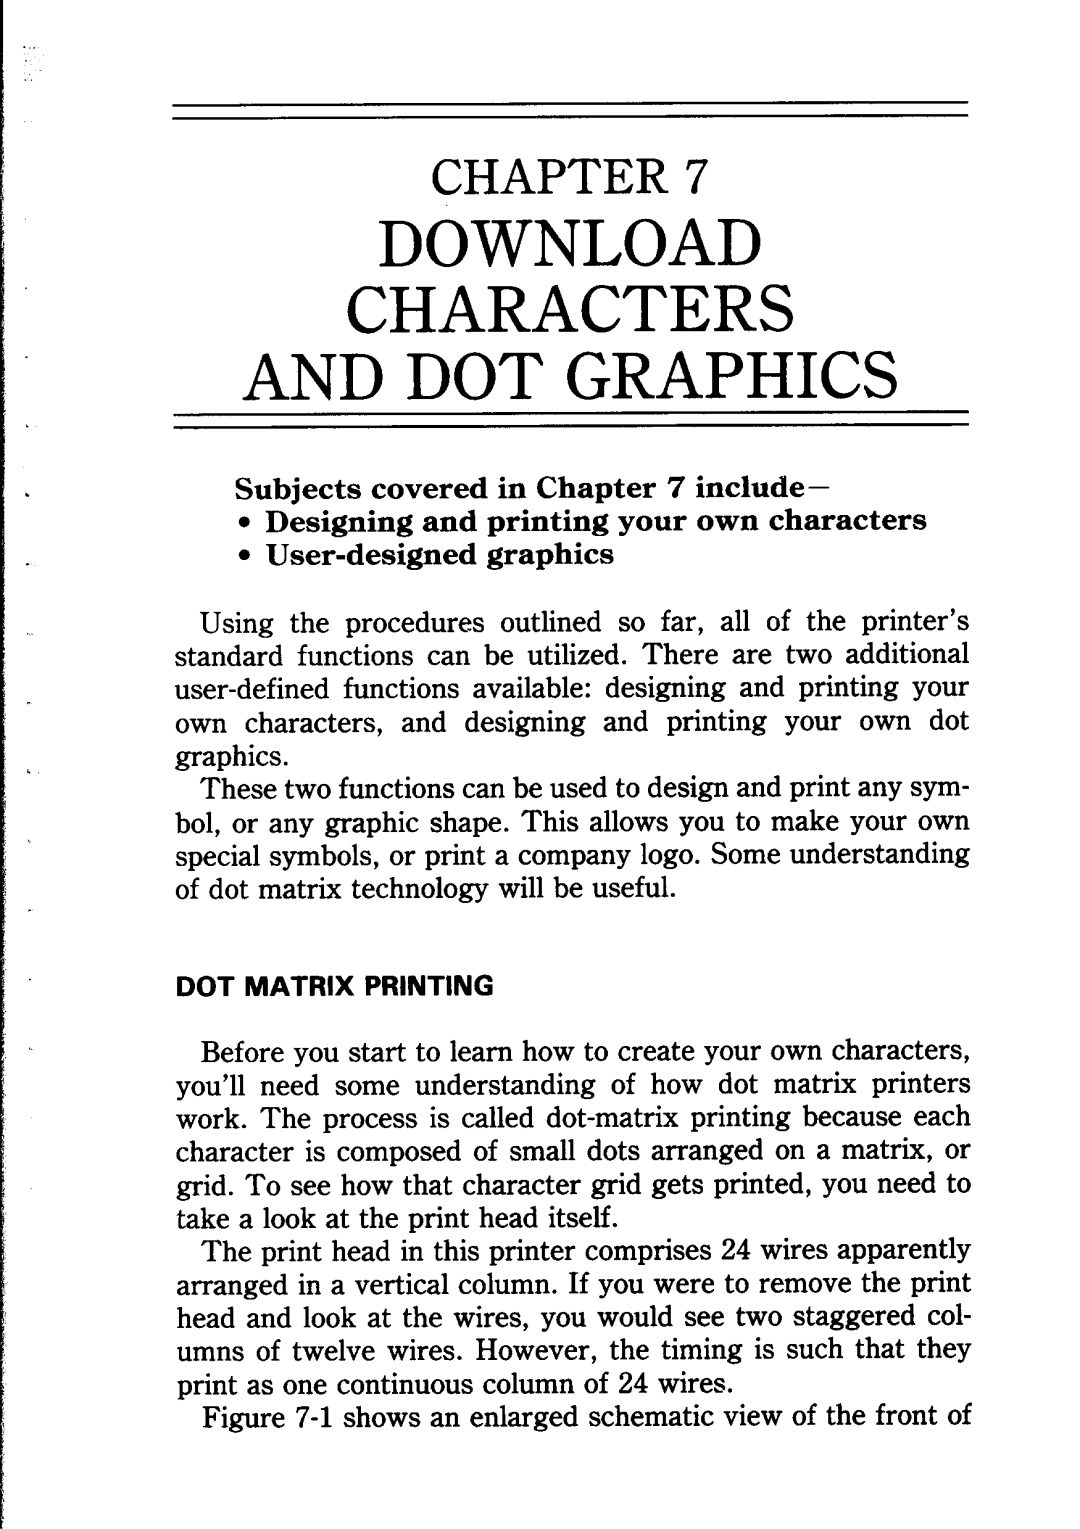 Star Micronics NB24-10/15 user manual Download Characters And Dot Graphics, Subjects covered in include, Chapter 